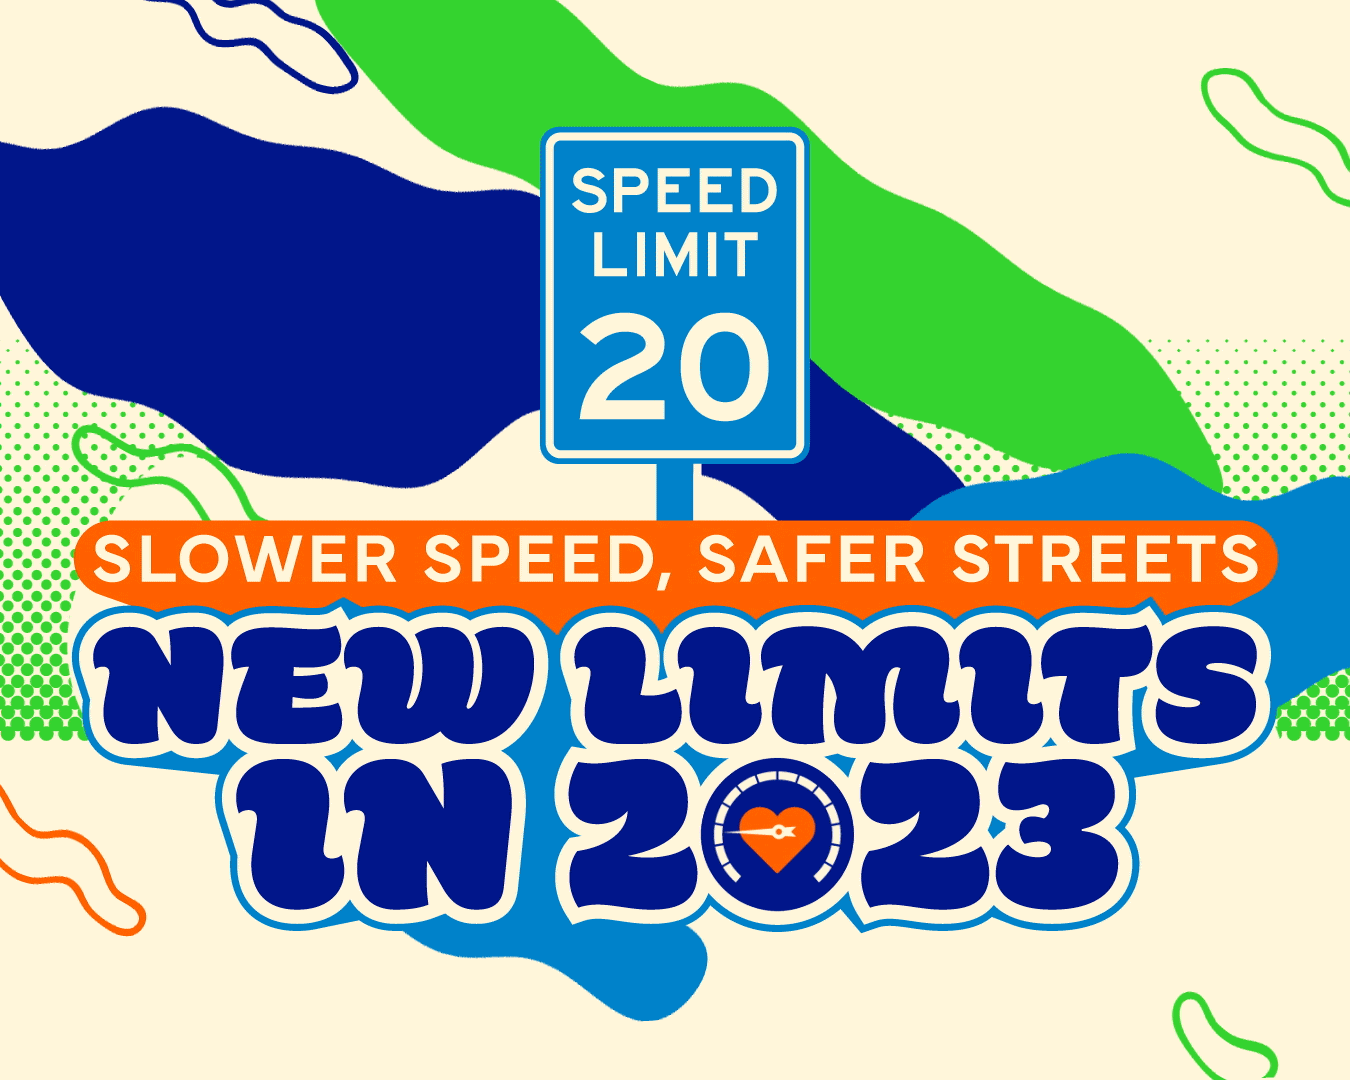 City of Tacoma speed reduction campaign animated GIF